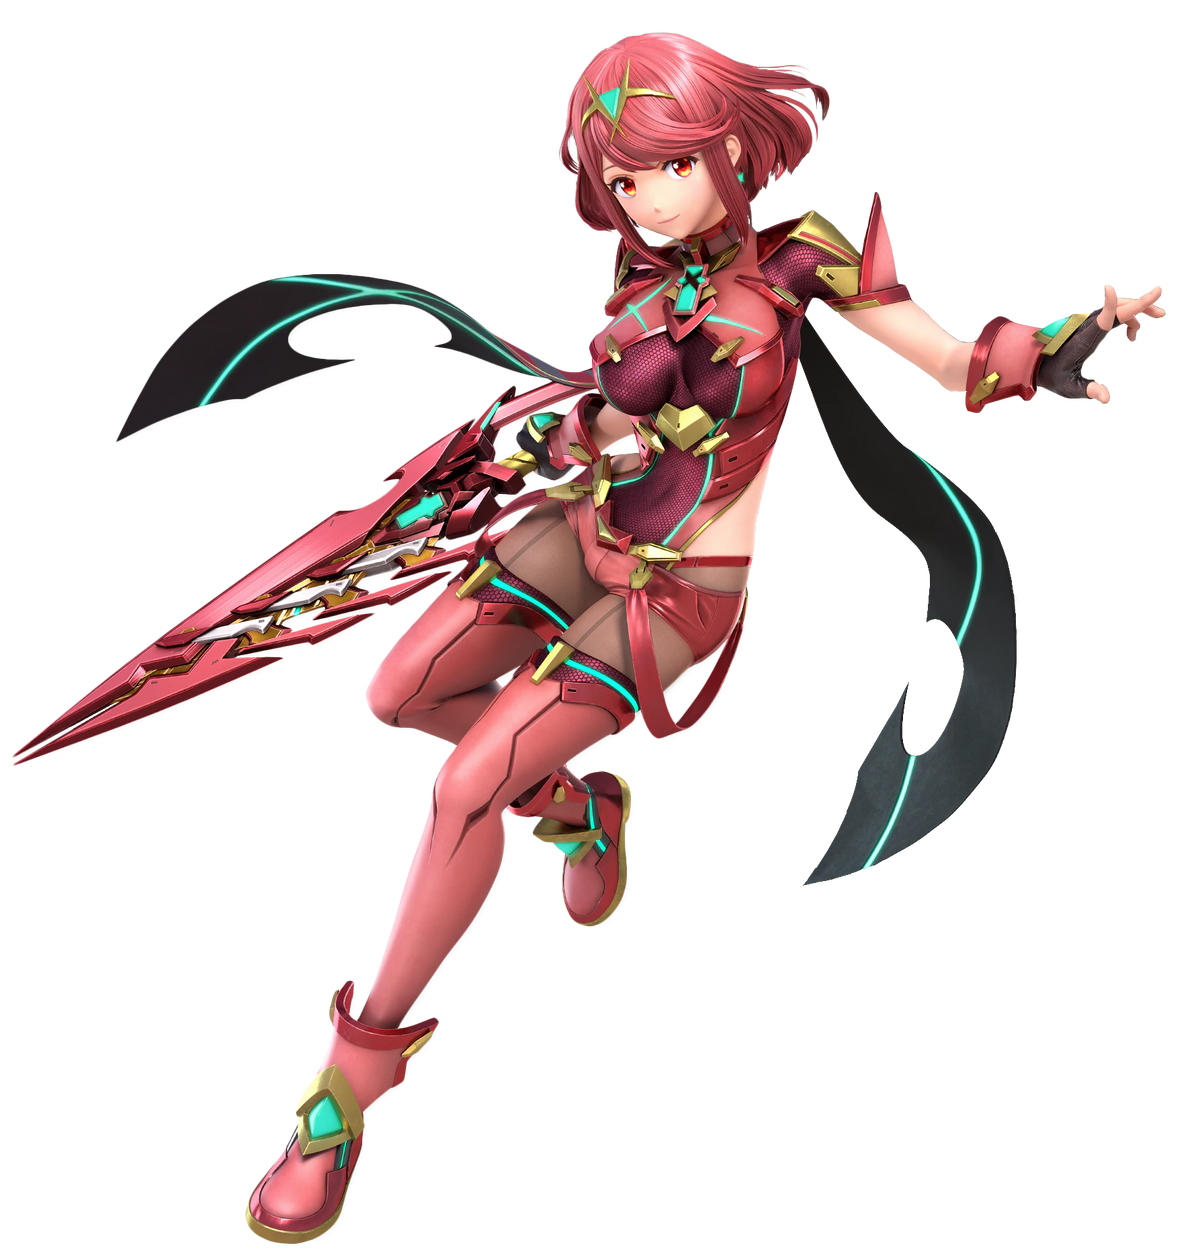 Exaggerated Breast Physics for Pyra/Mythra [Super Smash Bros. Ultimate]  [Mods]